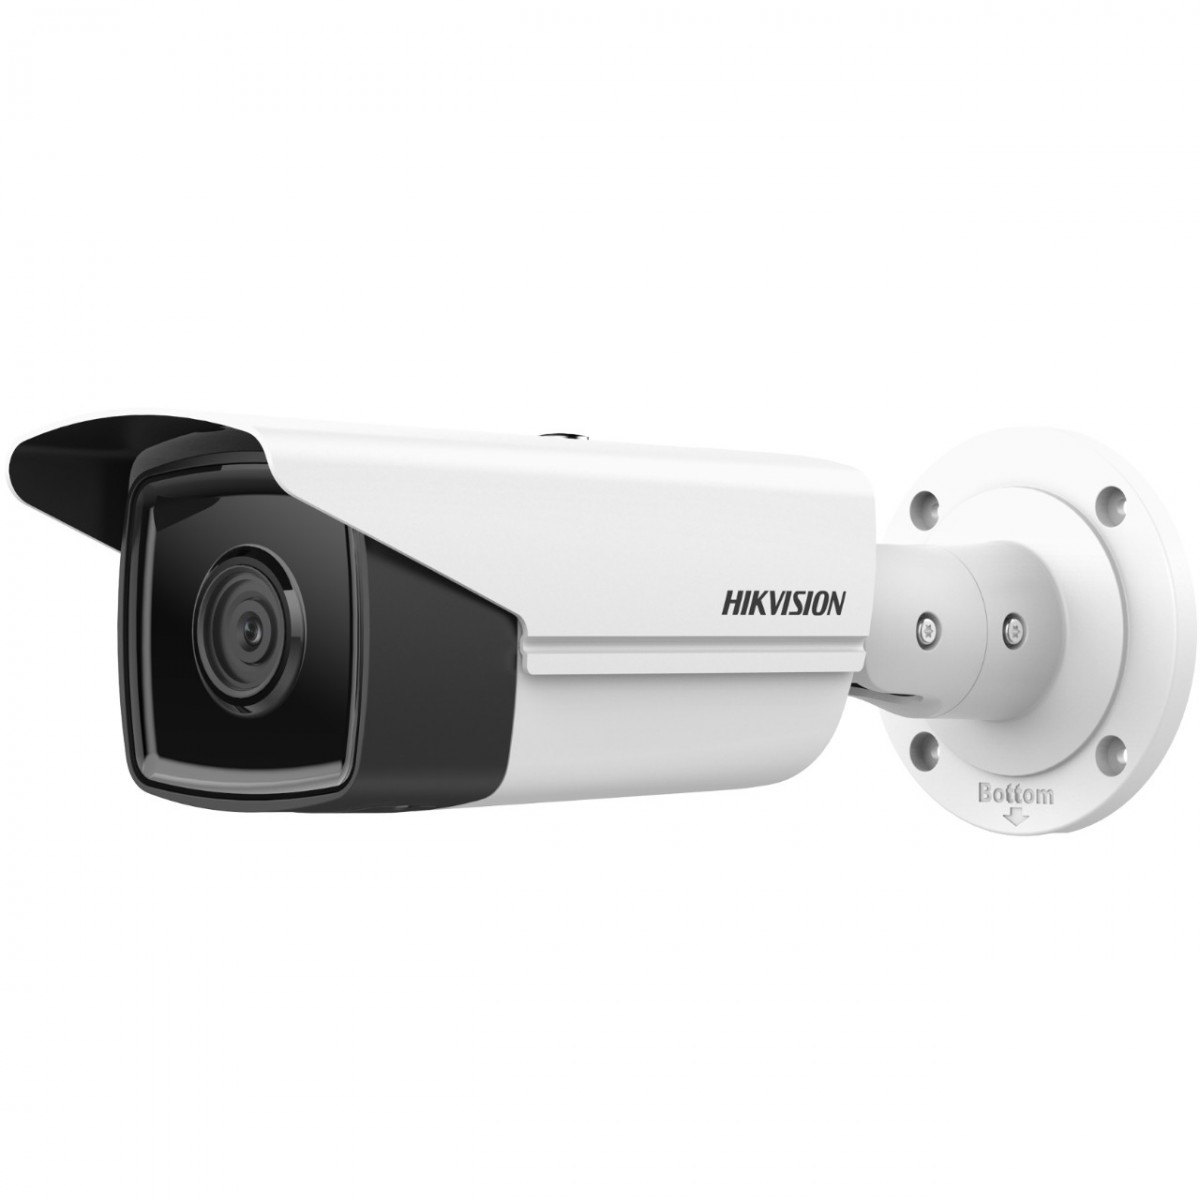 Hikvision Digital Technology DS-2CD2T43G2-2I - IP security camera - Outdoor - Wired - FCC SDoC (47 CFR 15 - B); CE-EMC (EN 55032